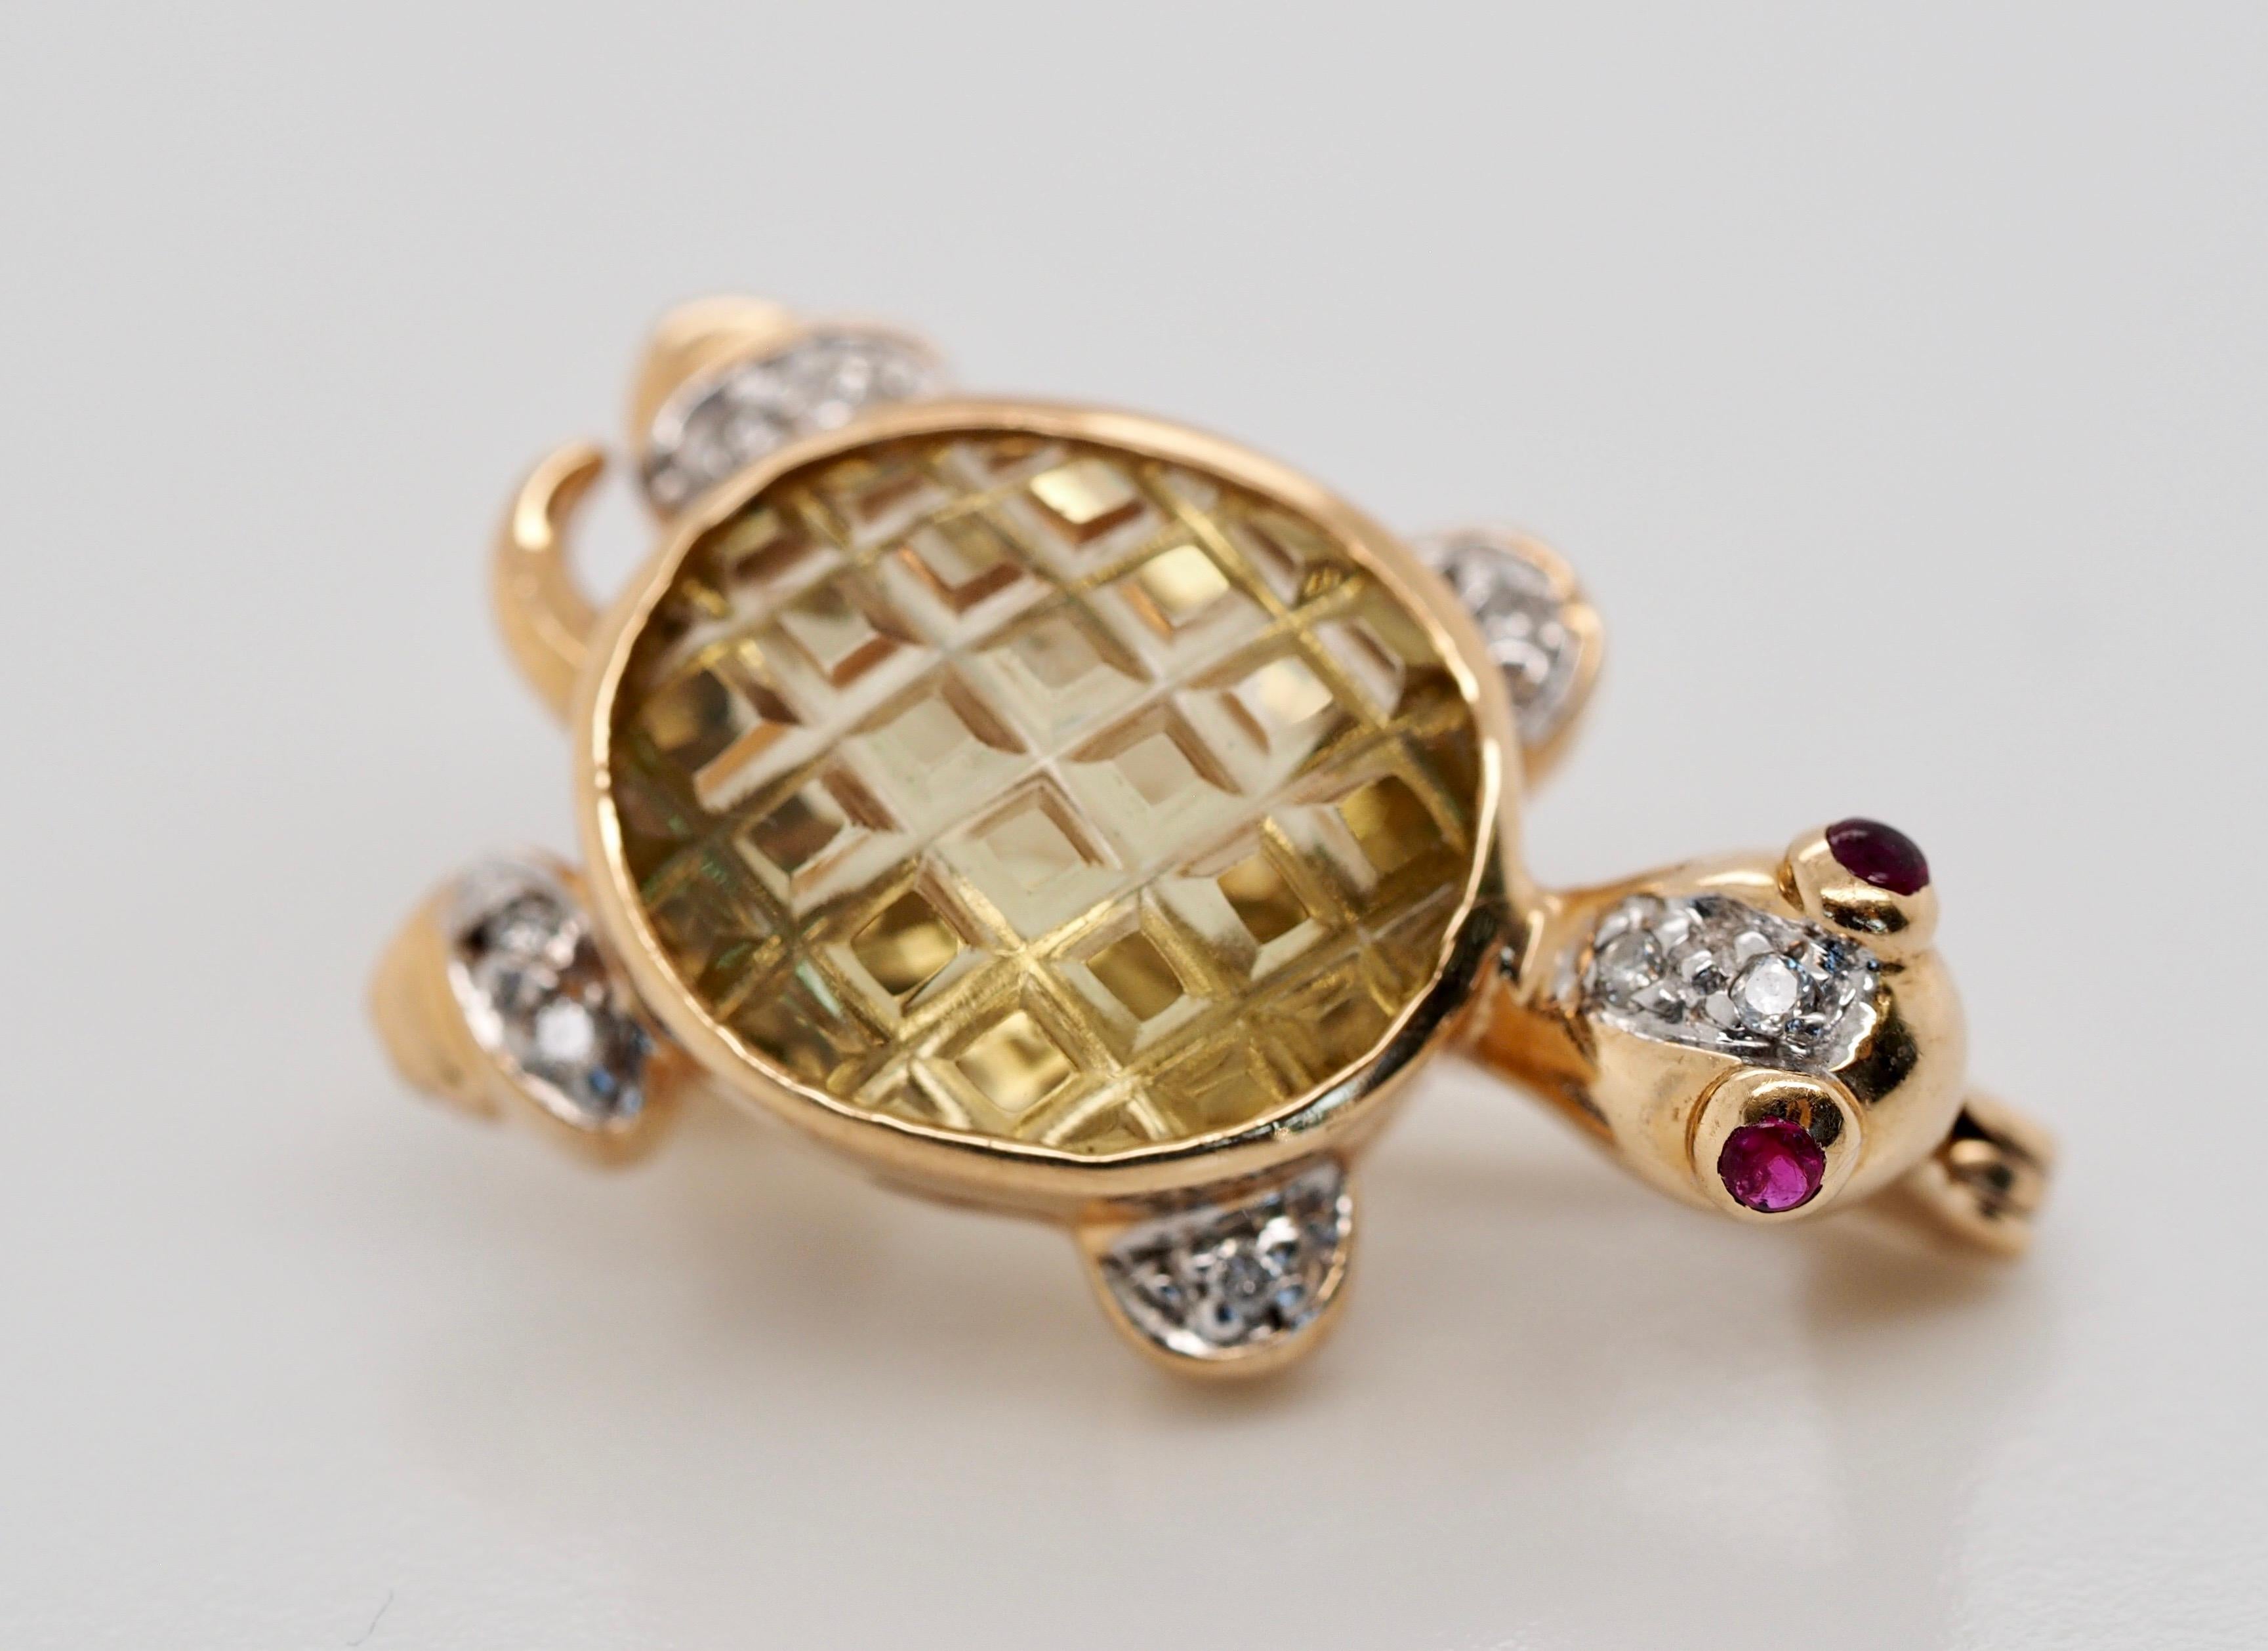 This adorable vintage brooch is such a fun and unique piece! It features a sweet little tortoise made up of different types of stones. For the body there is a stunning scissor-cut yellow quartz oval, and there are two lovely rubies for eyes, while